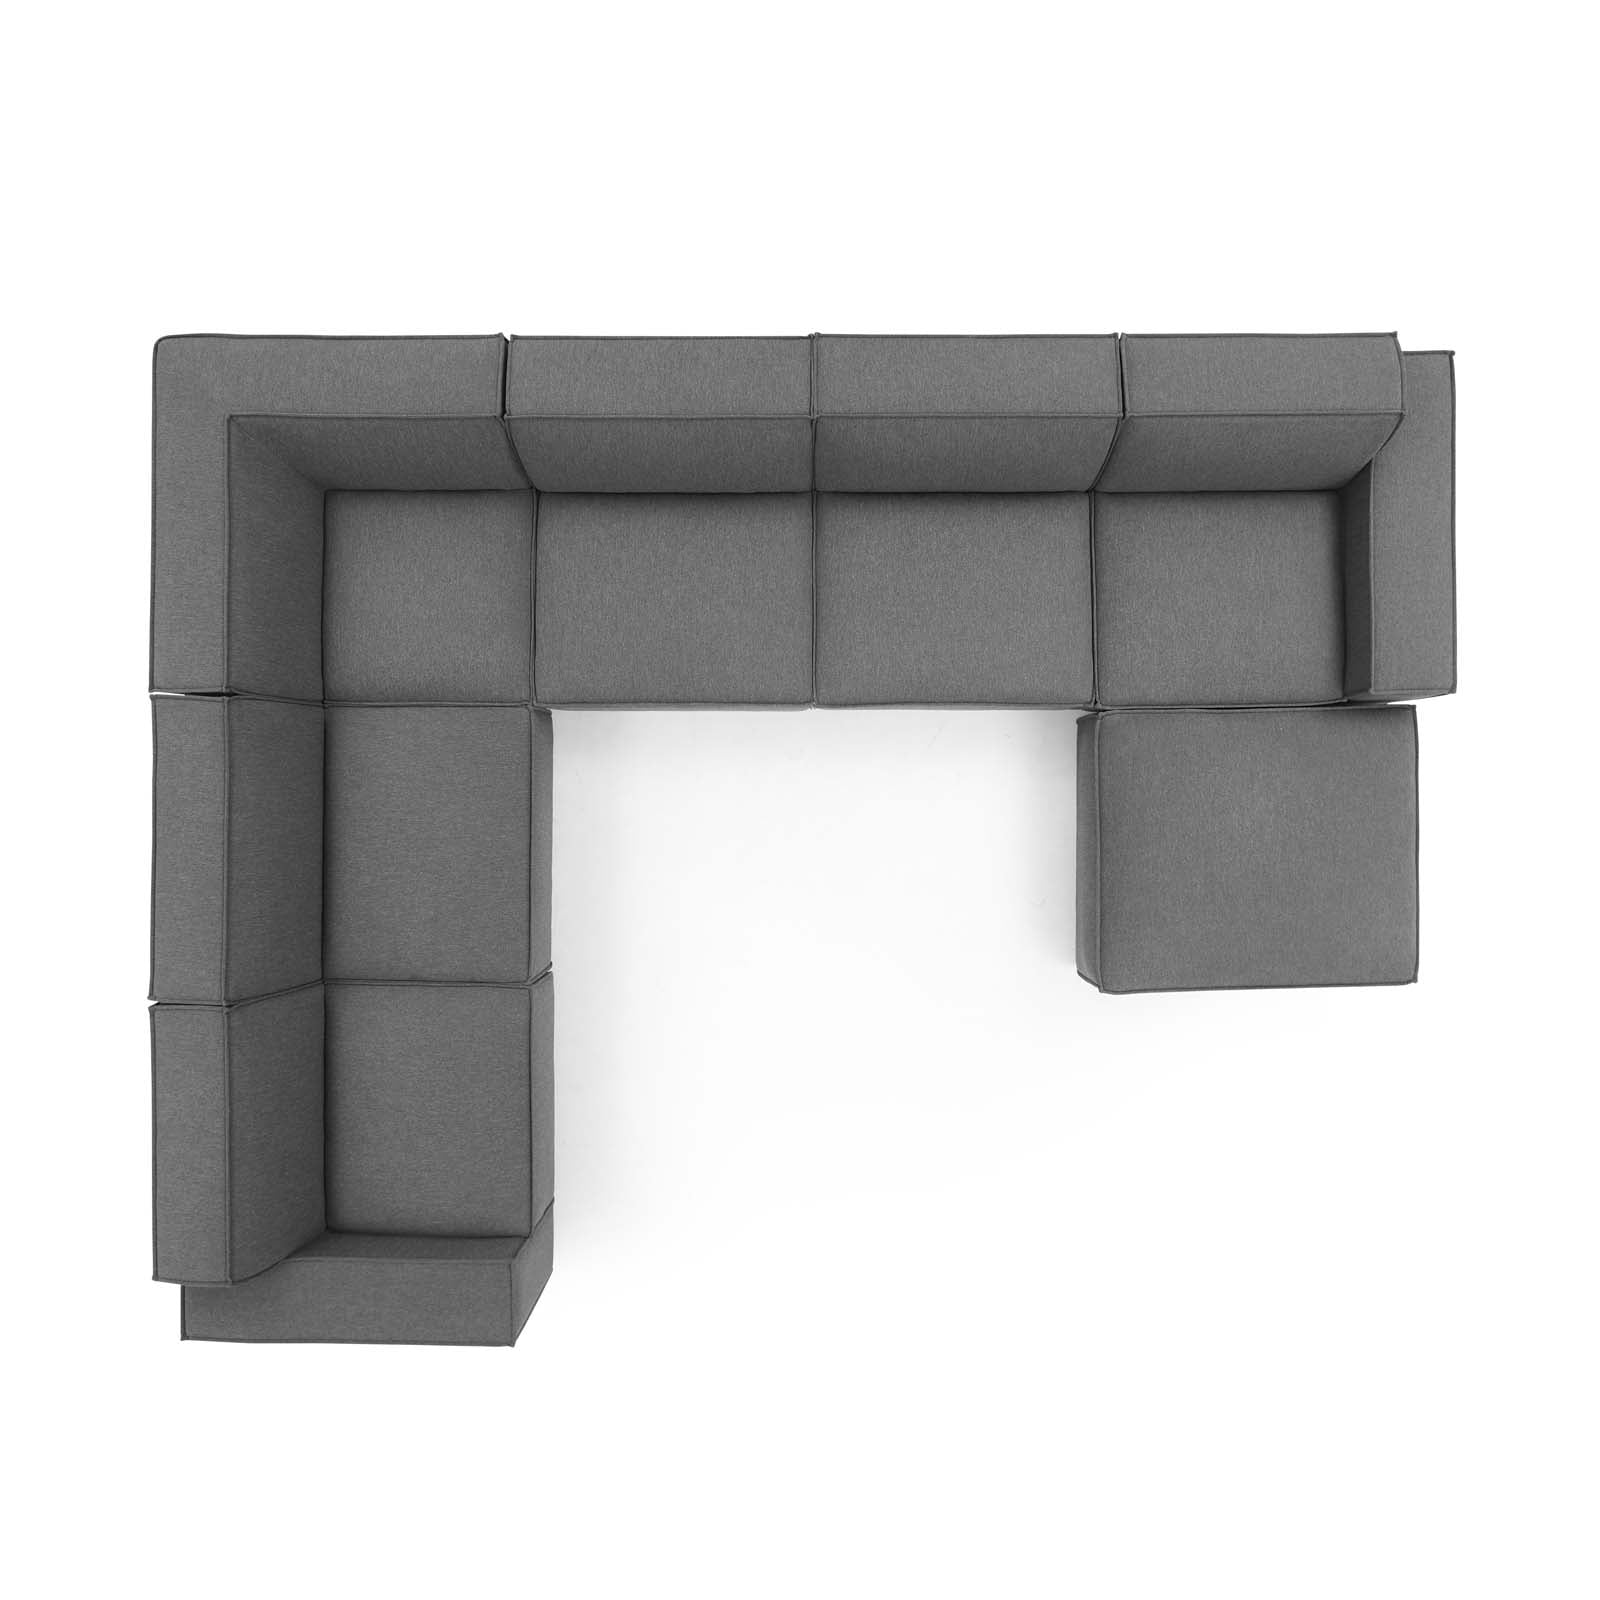 Restore 7-Piece Sectional Sofa-Sectional-Modway-Wall2Wall Furnishings